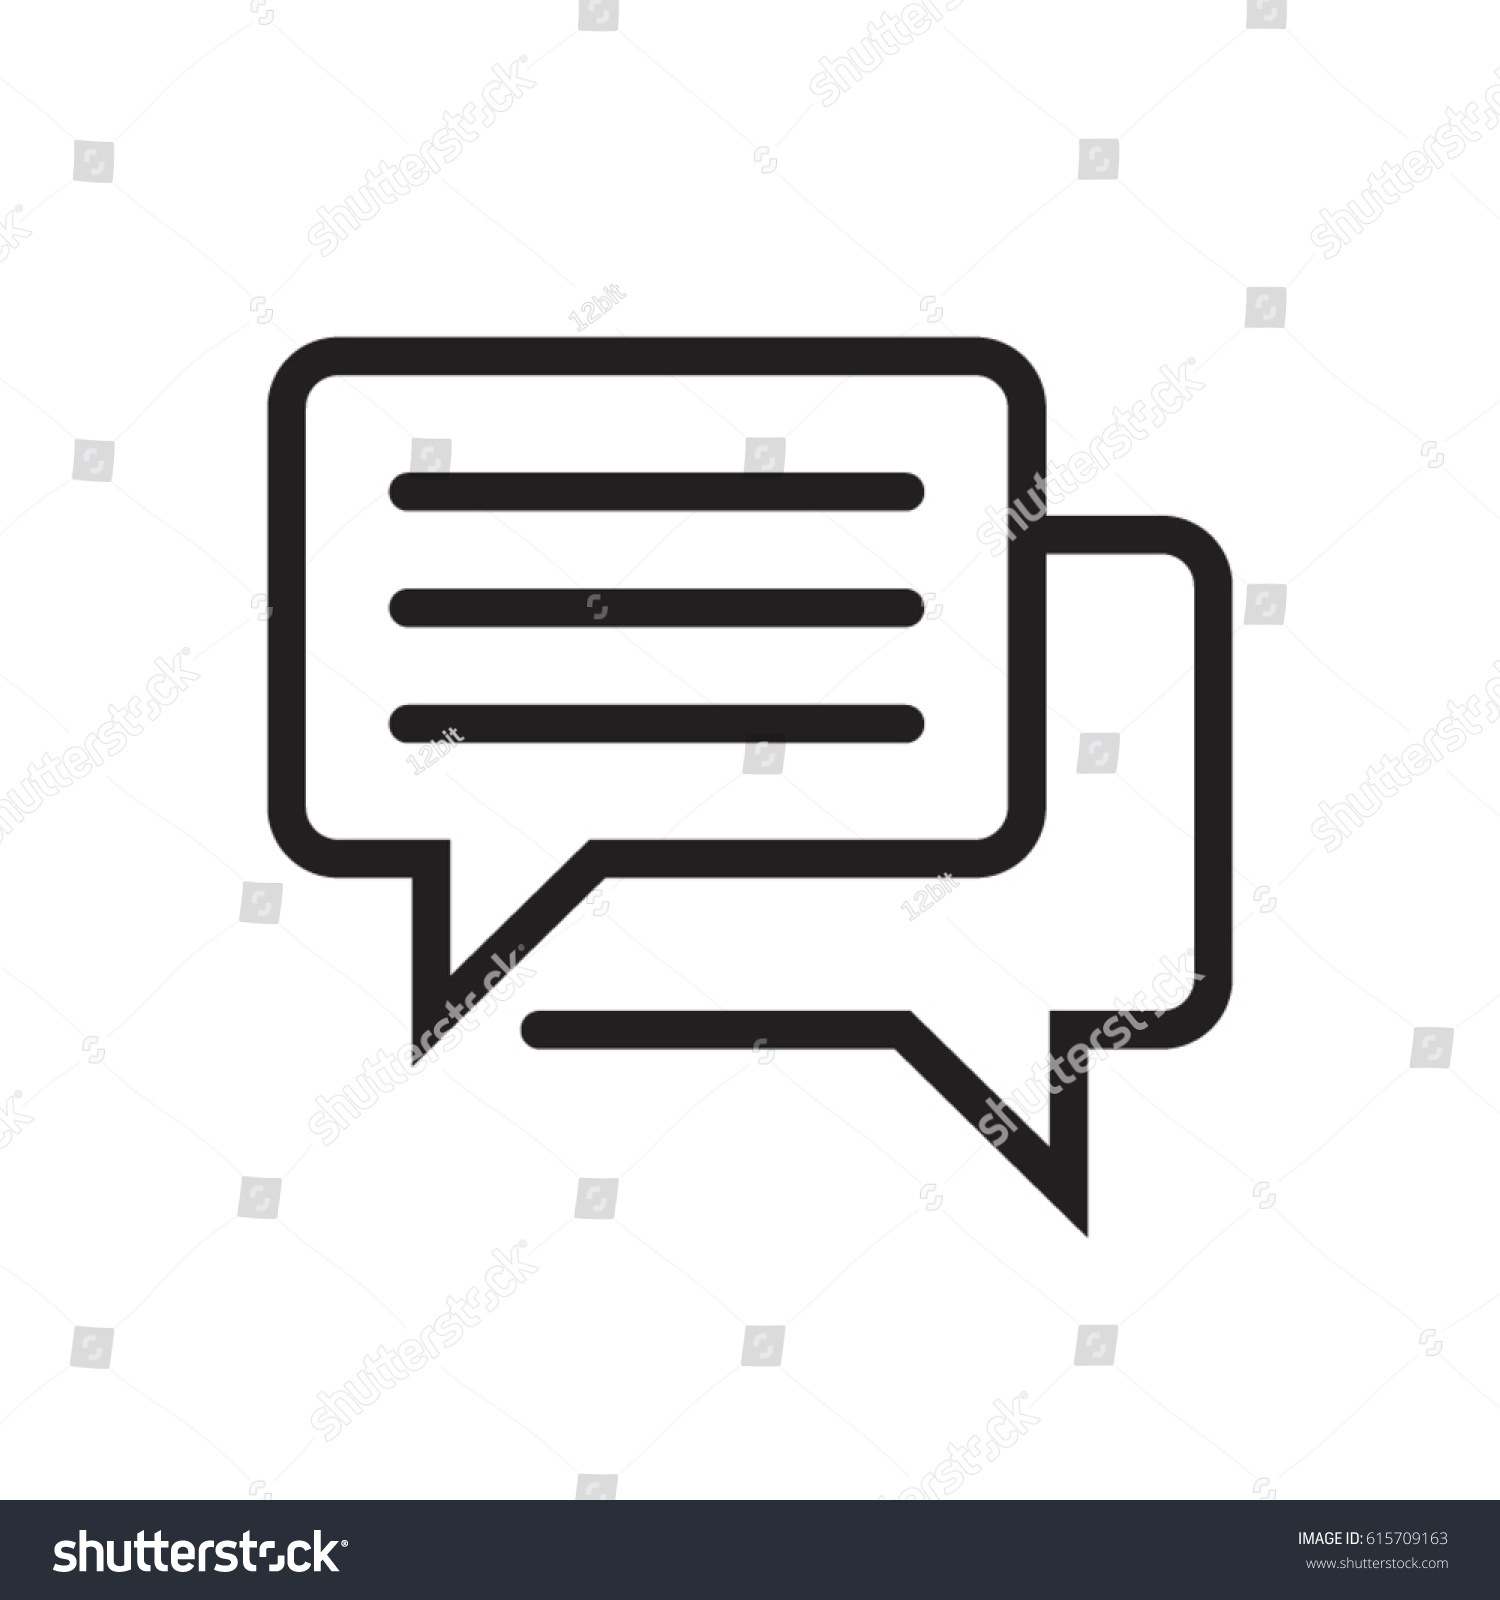 Blog, message speech balloon line flat vector icon for mobile application, button and website design. Illustration isolated on white background. EPS 10 design, logo, app, infographic. #615709163